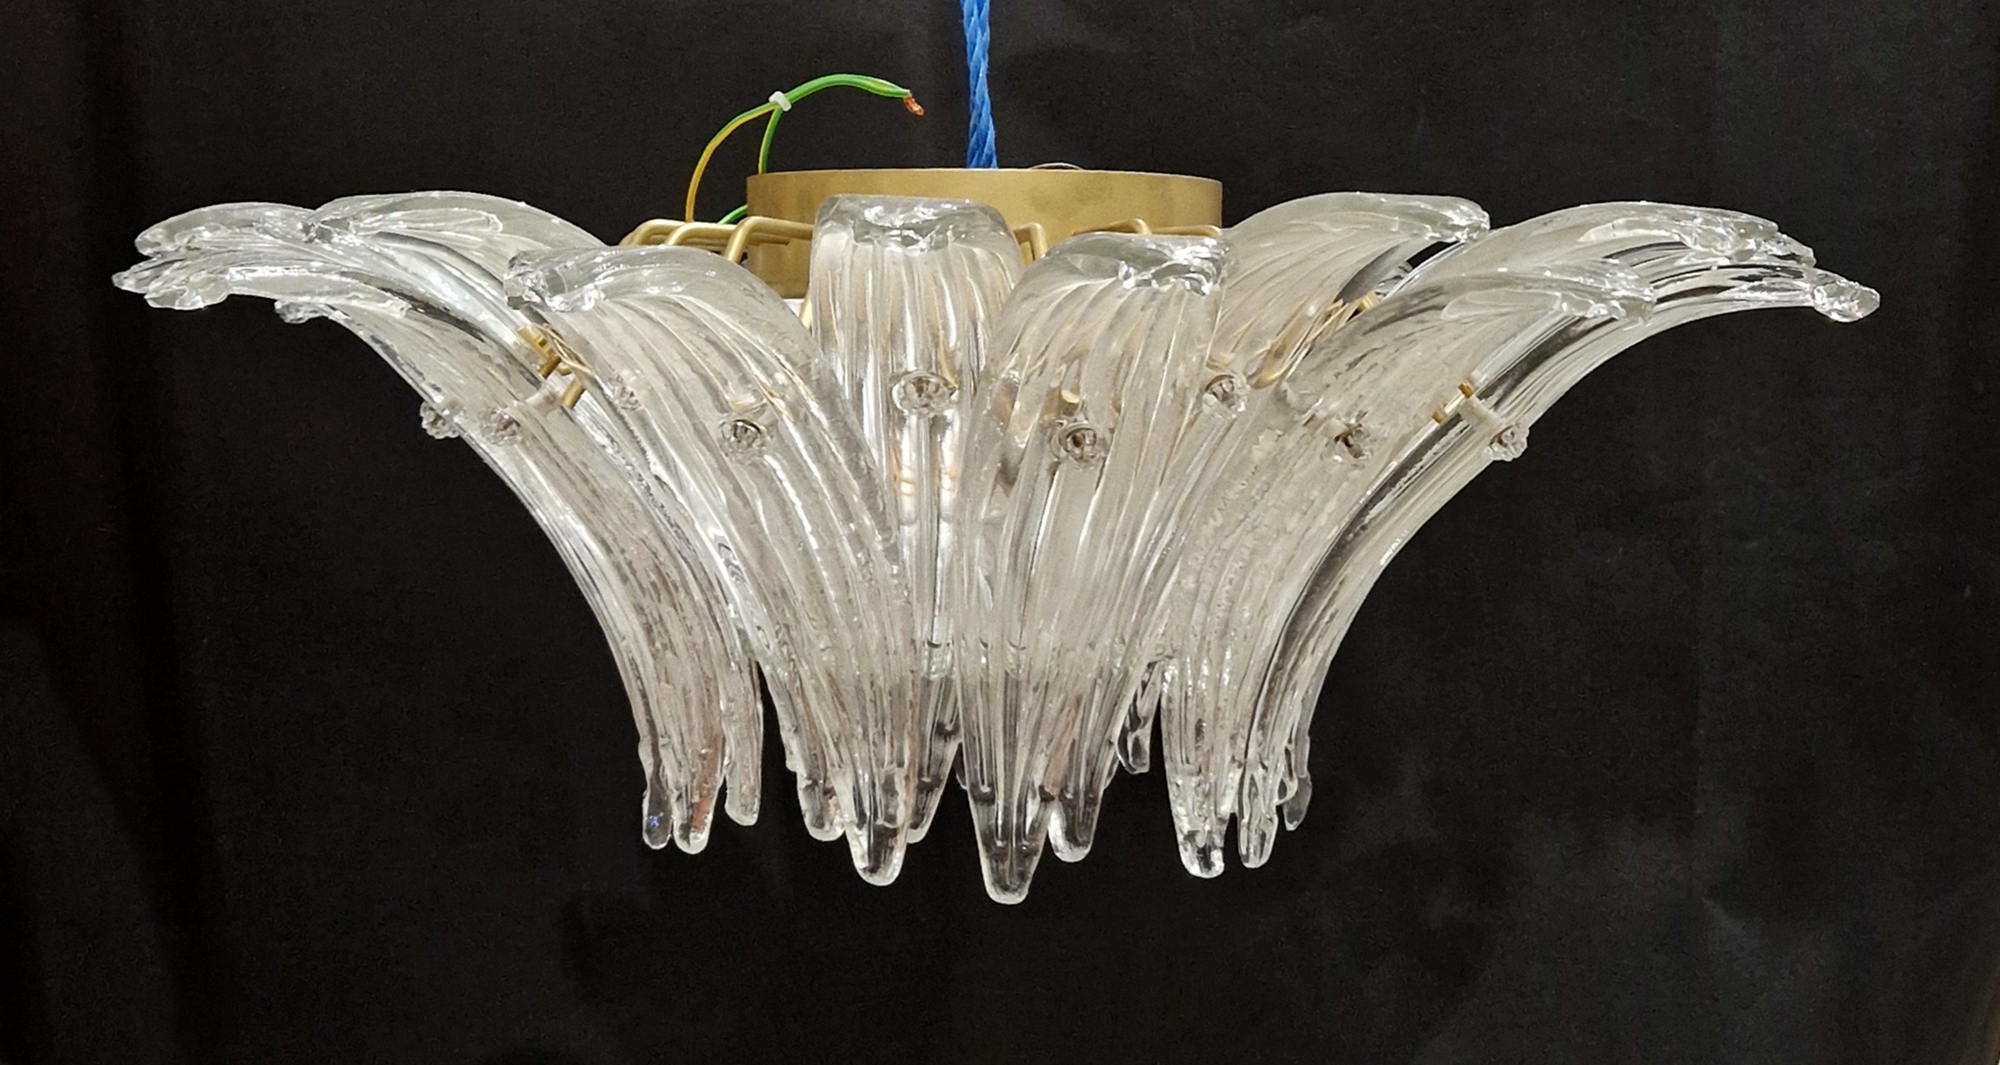 Barovier & Toso Murano glass 'Palmette' suspension lamp/electrolier, 5310 series, in the form of - Image 2 of 2